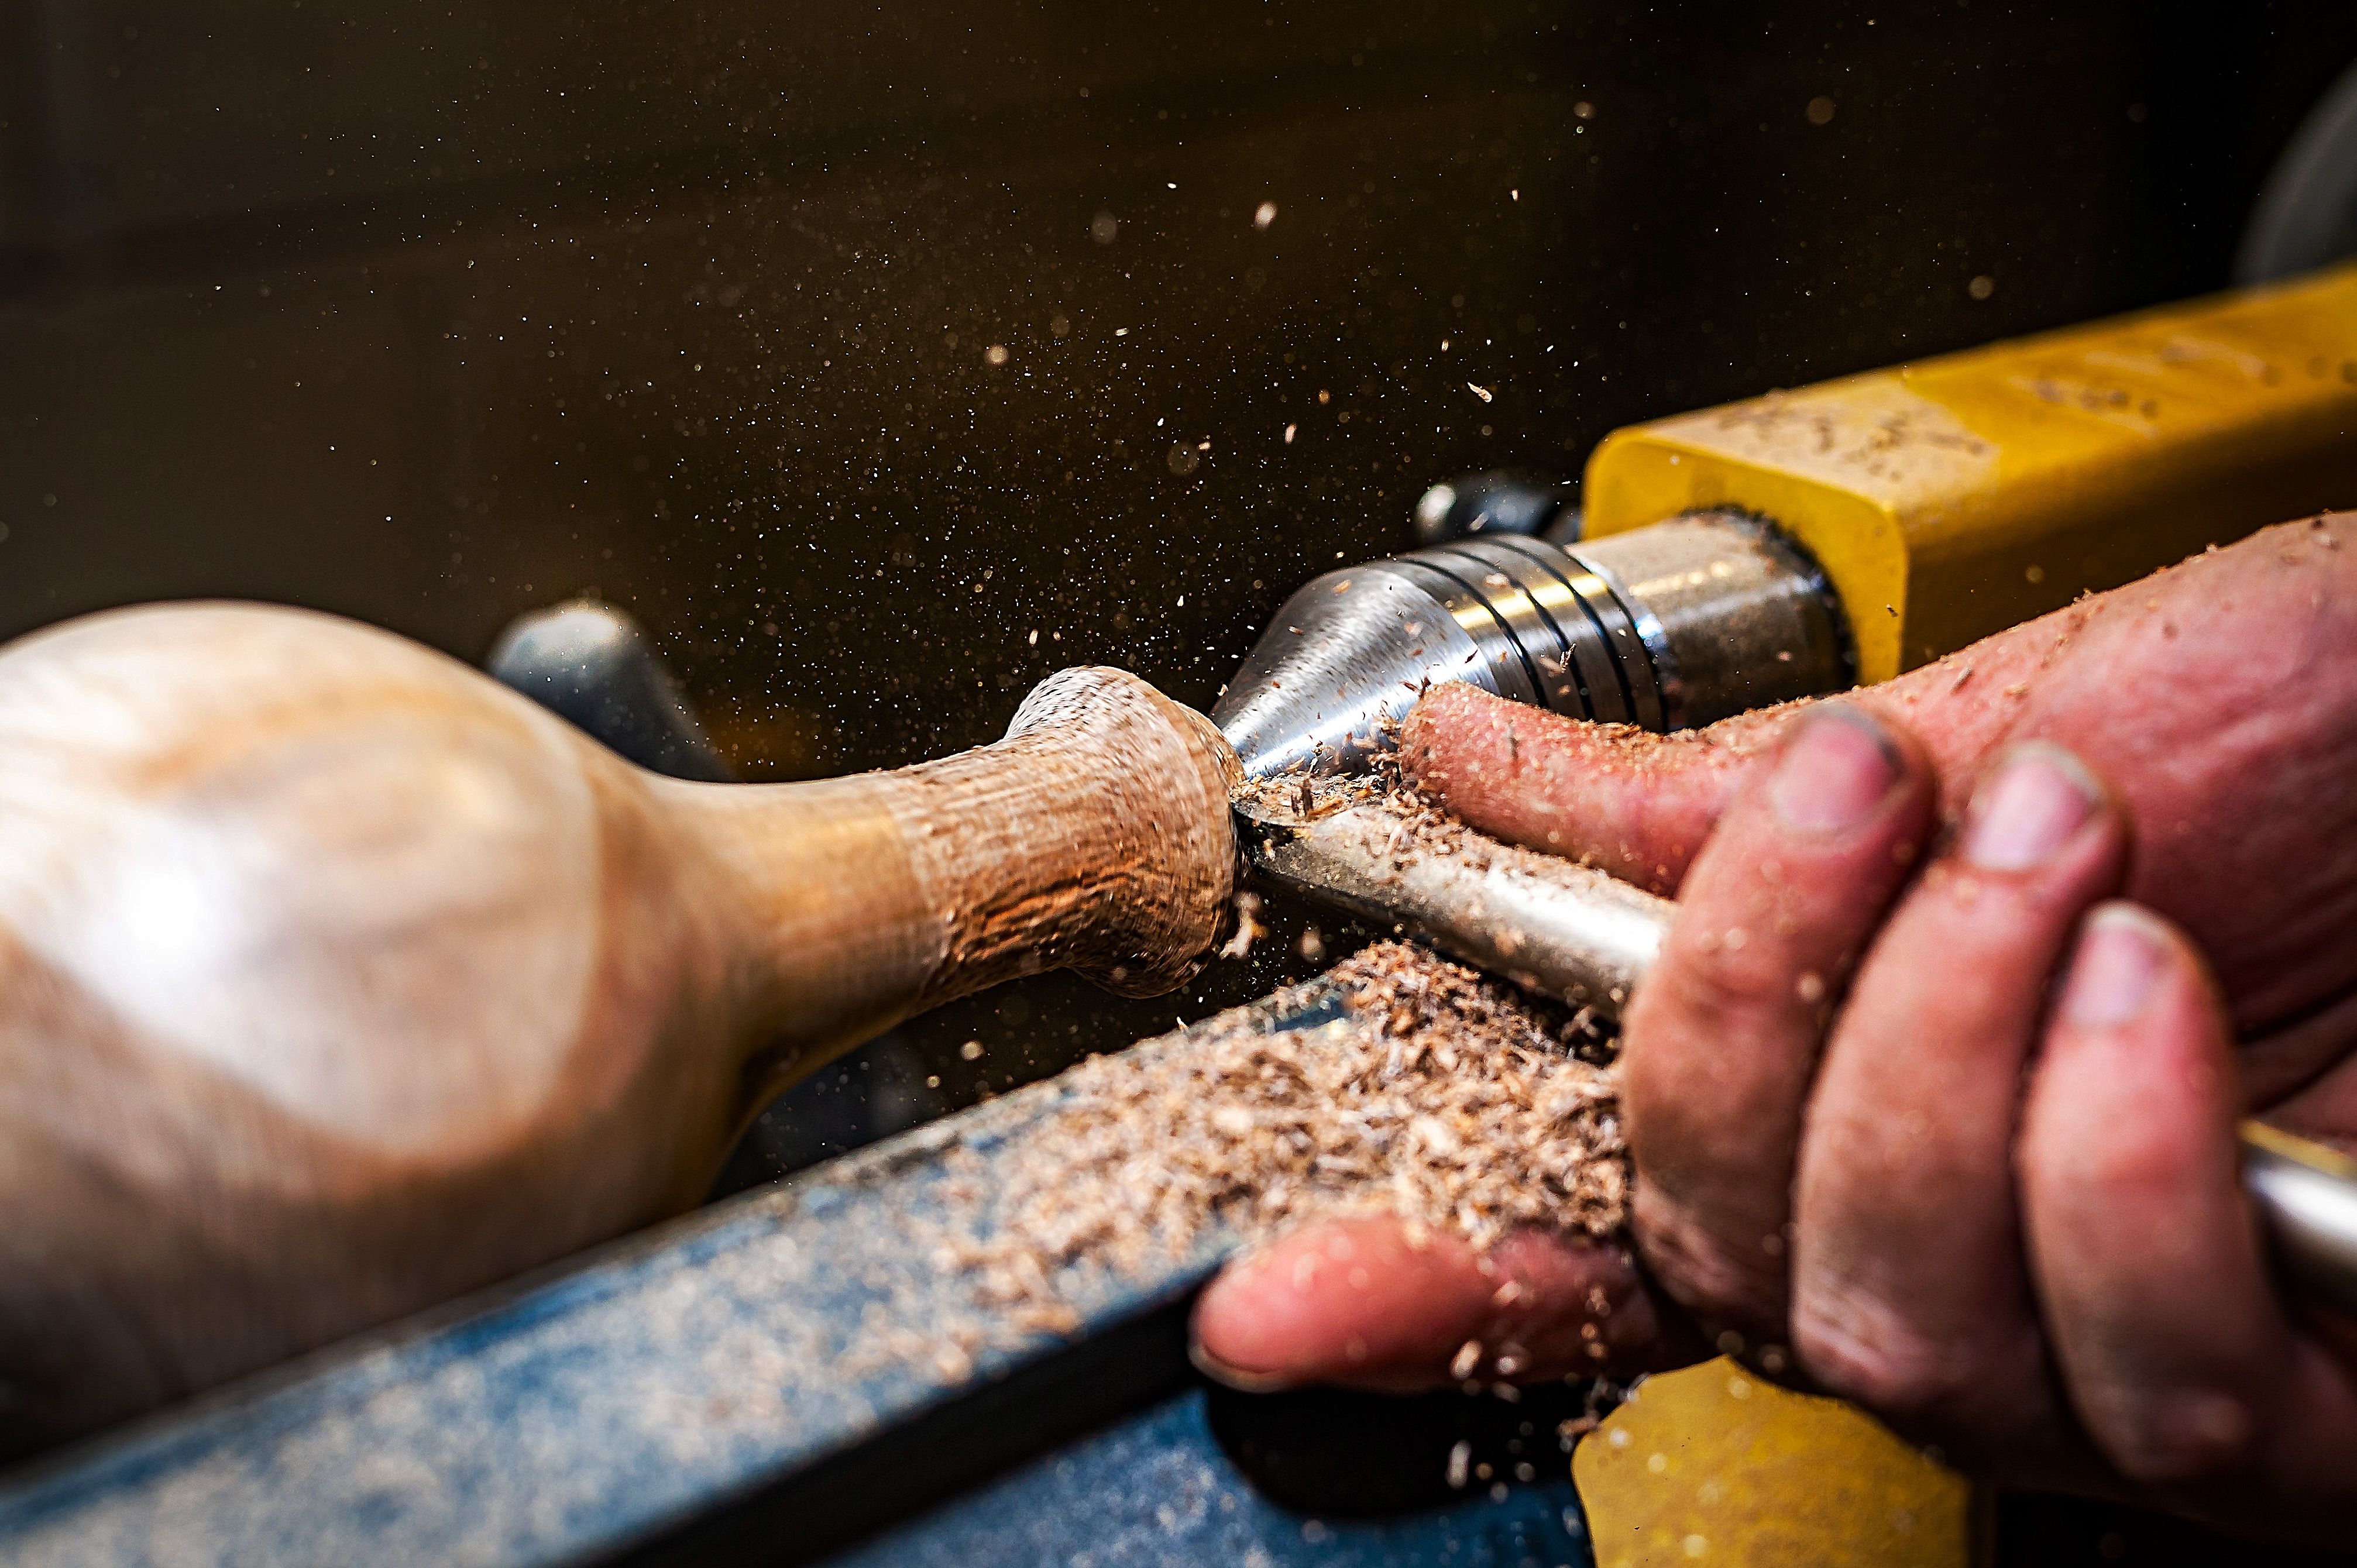 The pros and cons of power tools vs hand tools for wood carving